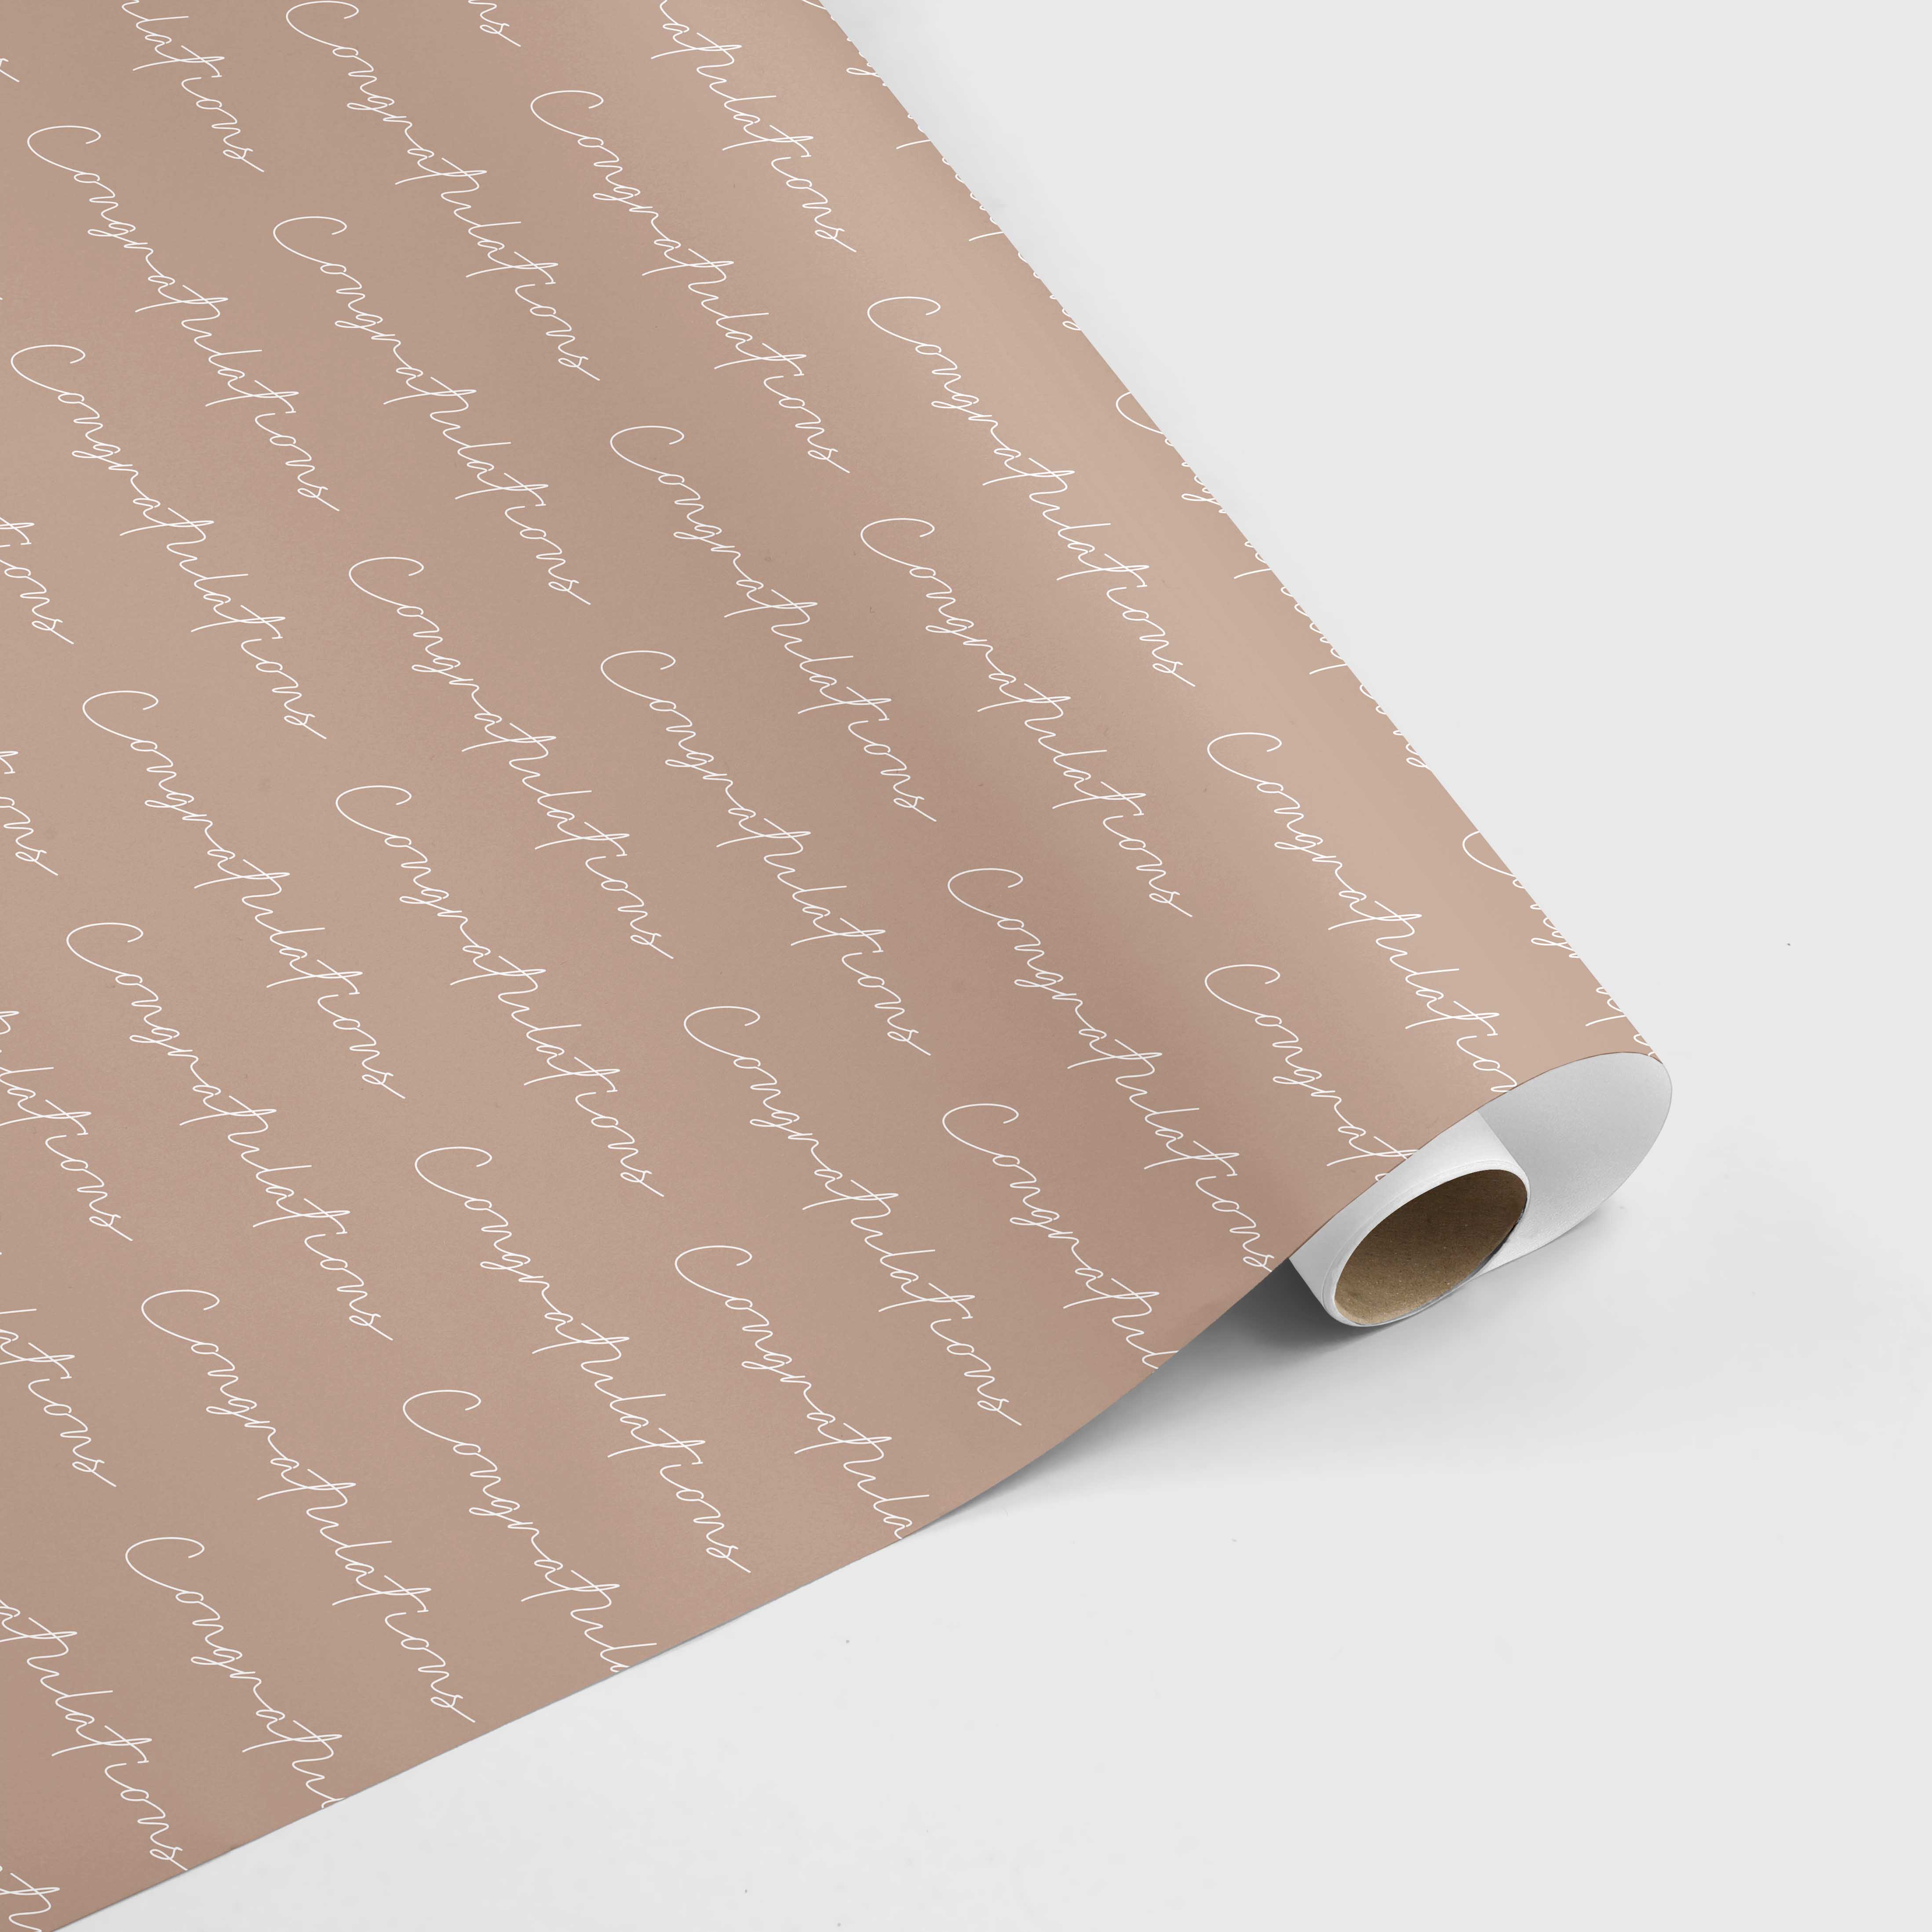 Cream congratulations wrapping sheets+note cards<br/>(set of 5)